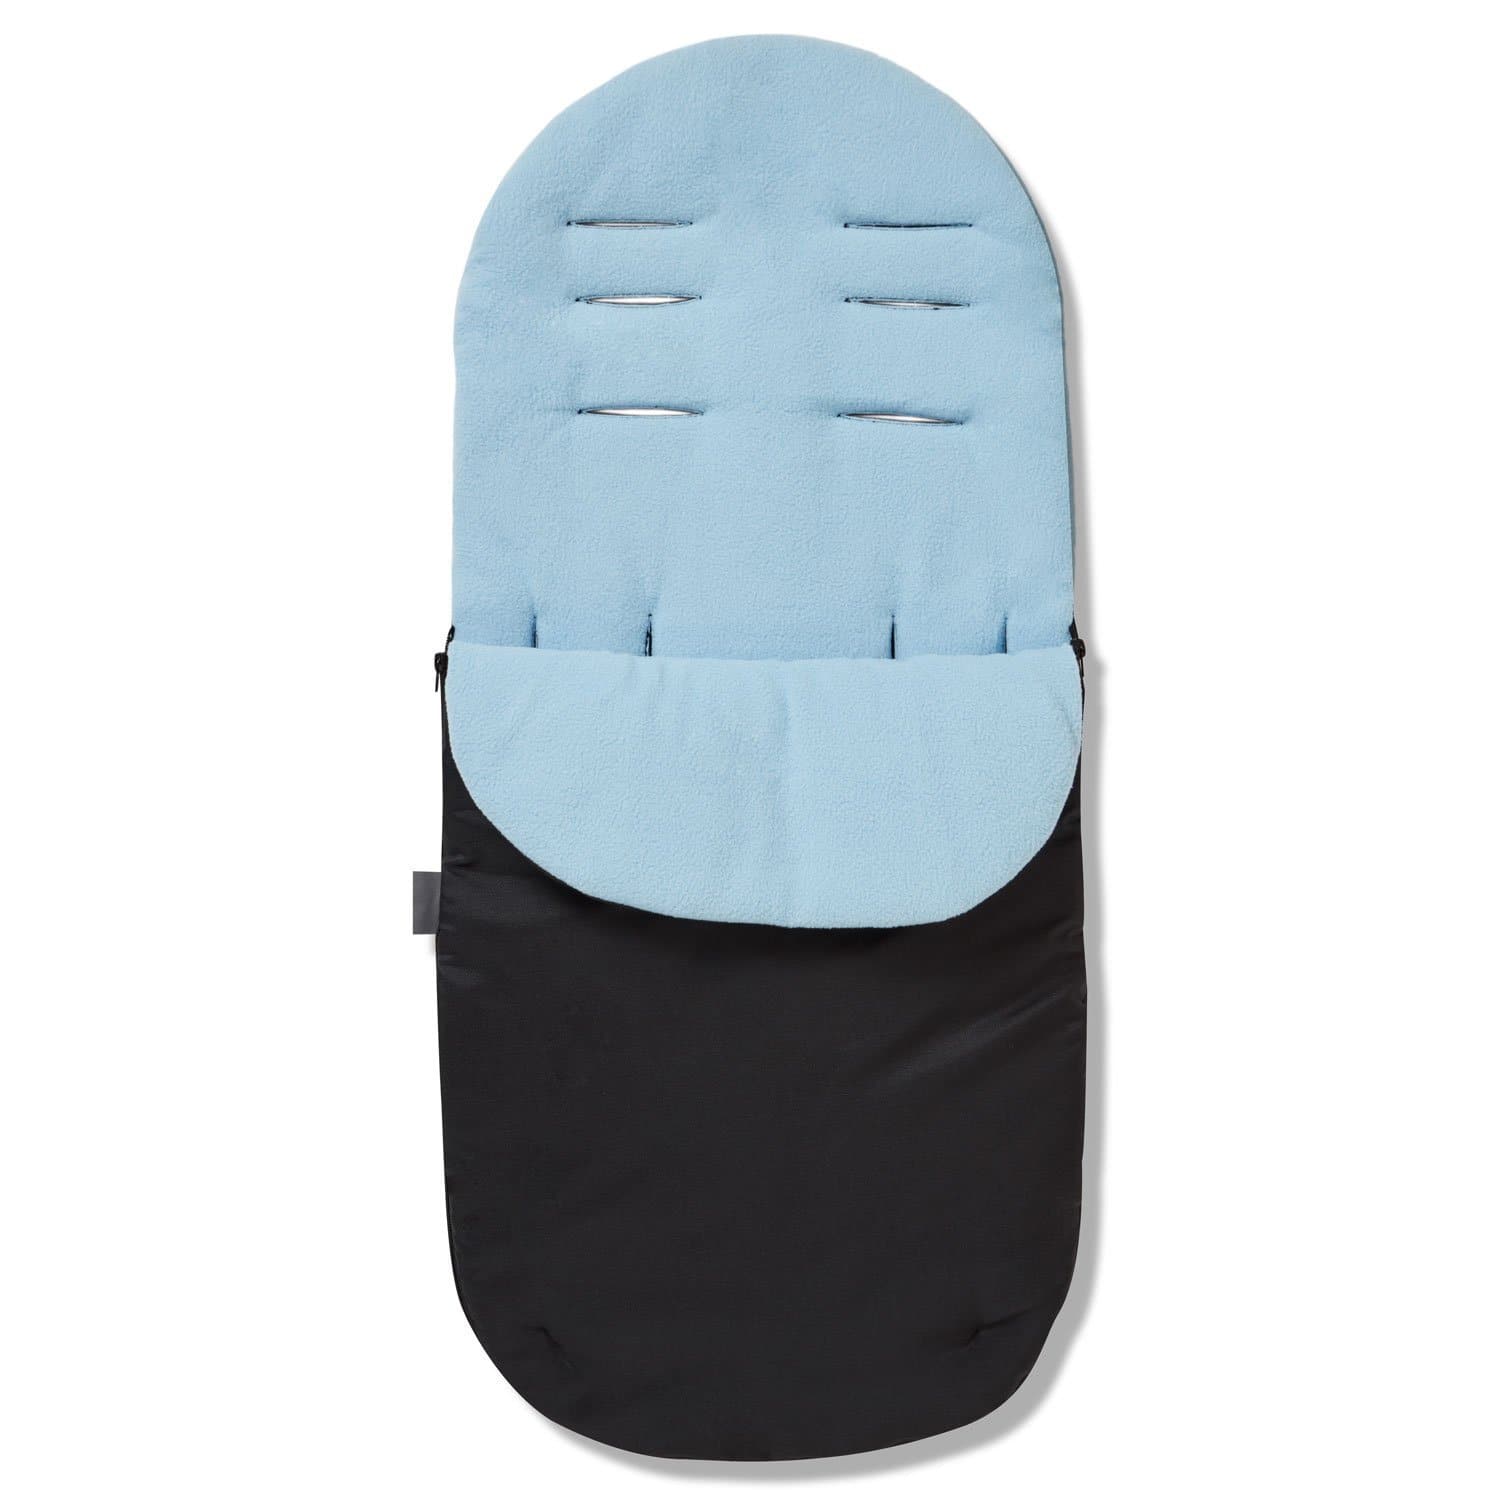 Footmuff / Cosy Toes Compatible with Mothercare - Light Blue / Fits All Models | For Your Little One